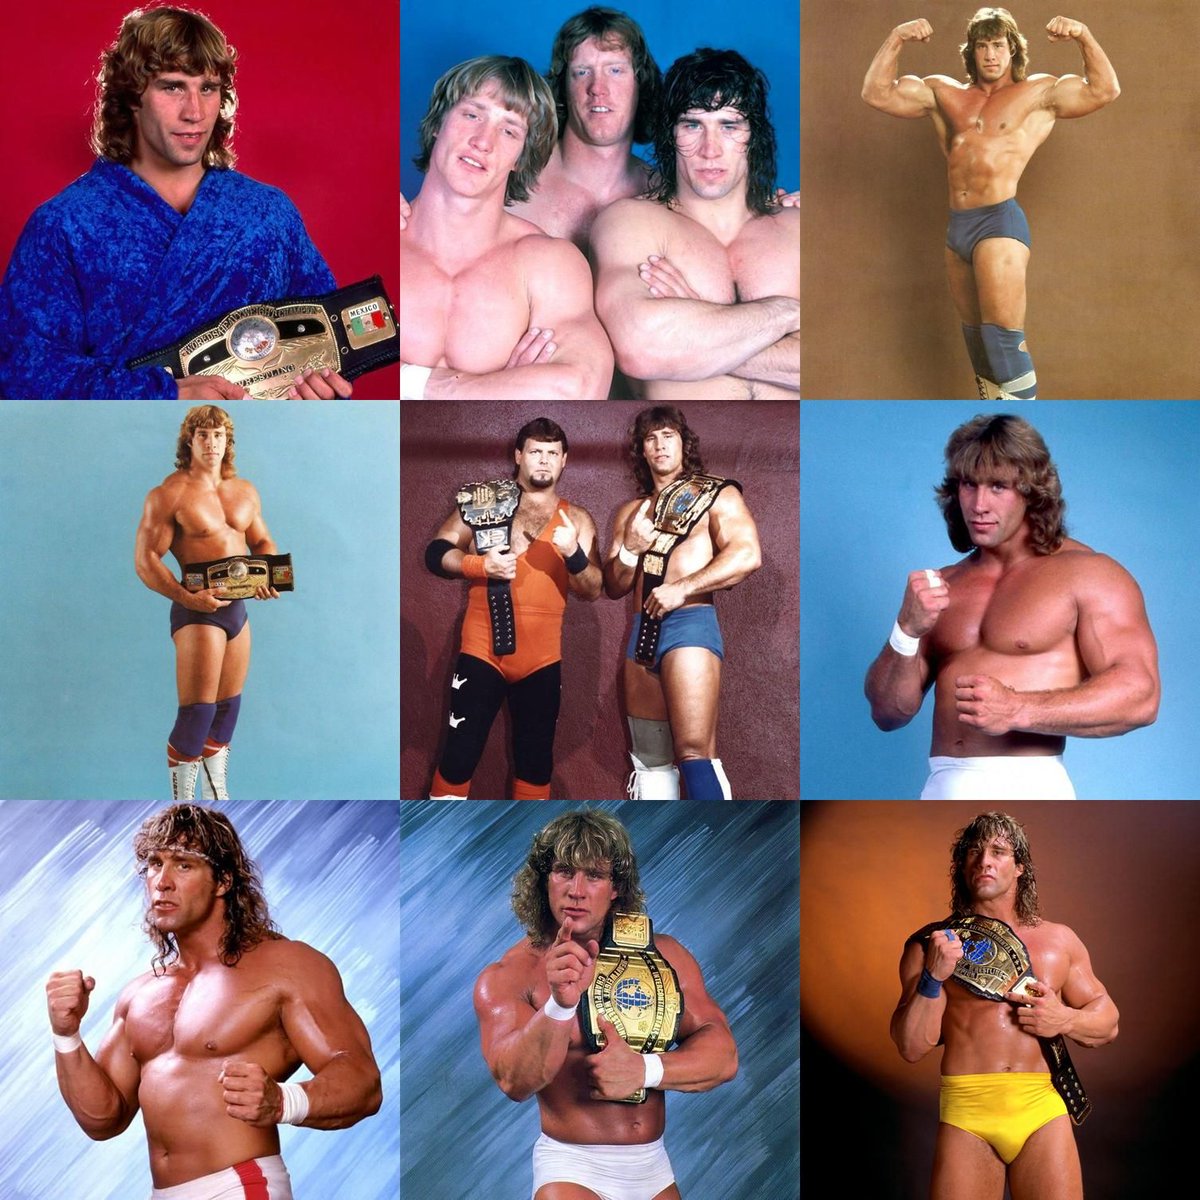 On the anniversary of his tragic passing, we remember Kerry Von Erich. #WWF #WCCW #USWA #NWA #WWE #Wrestling #KerryVonErich